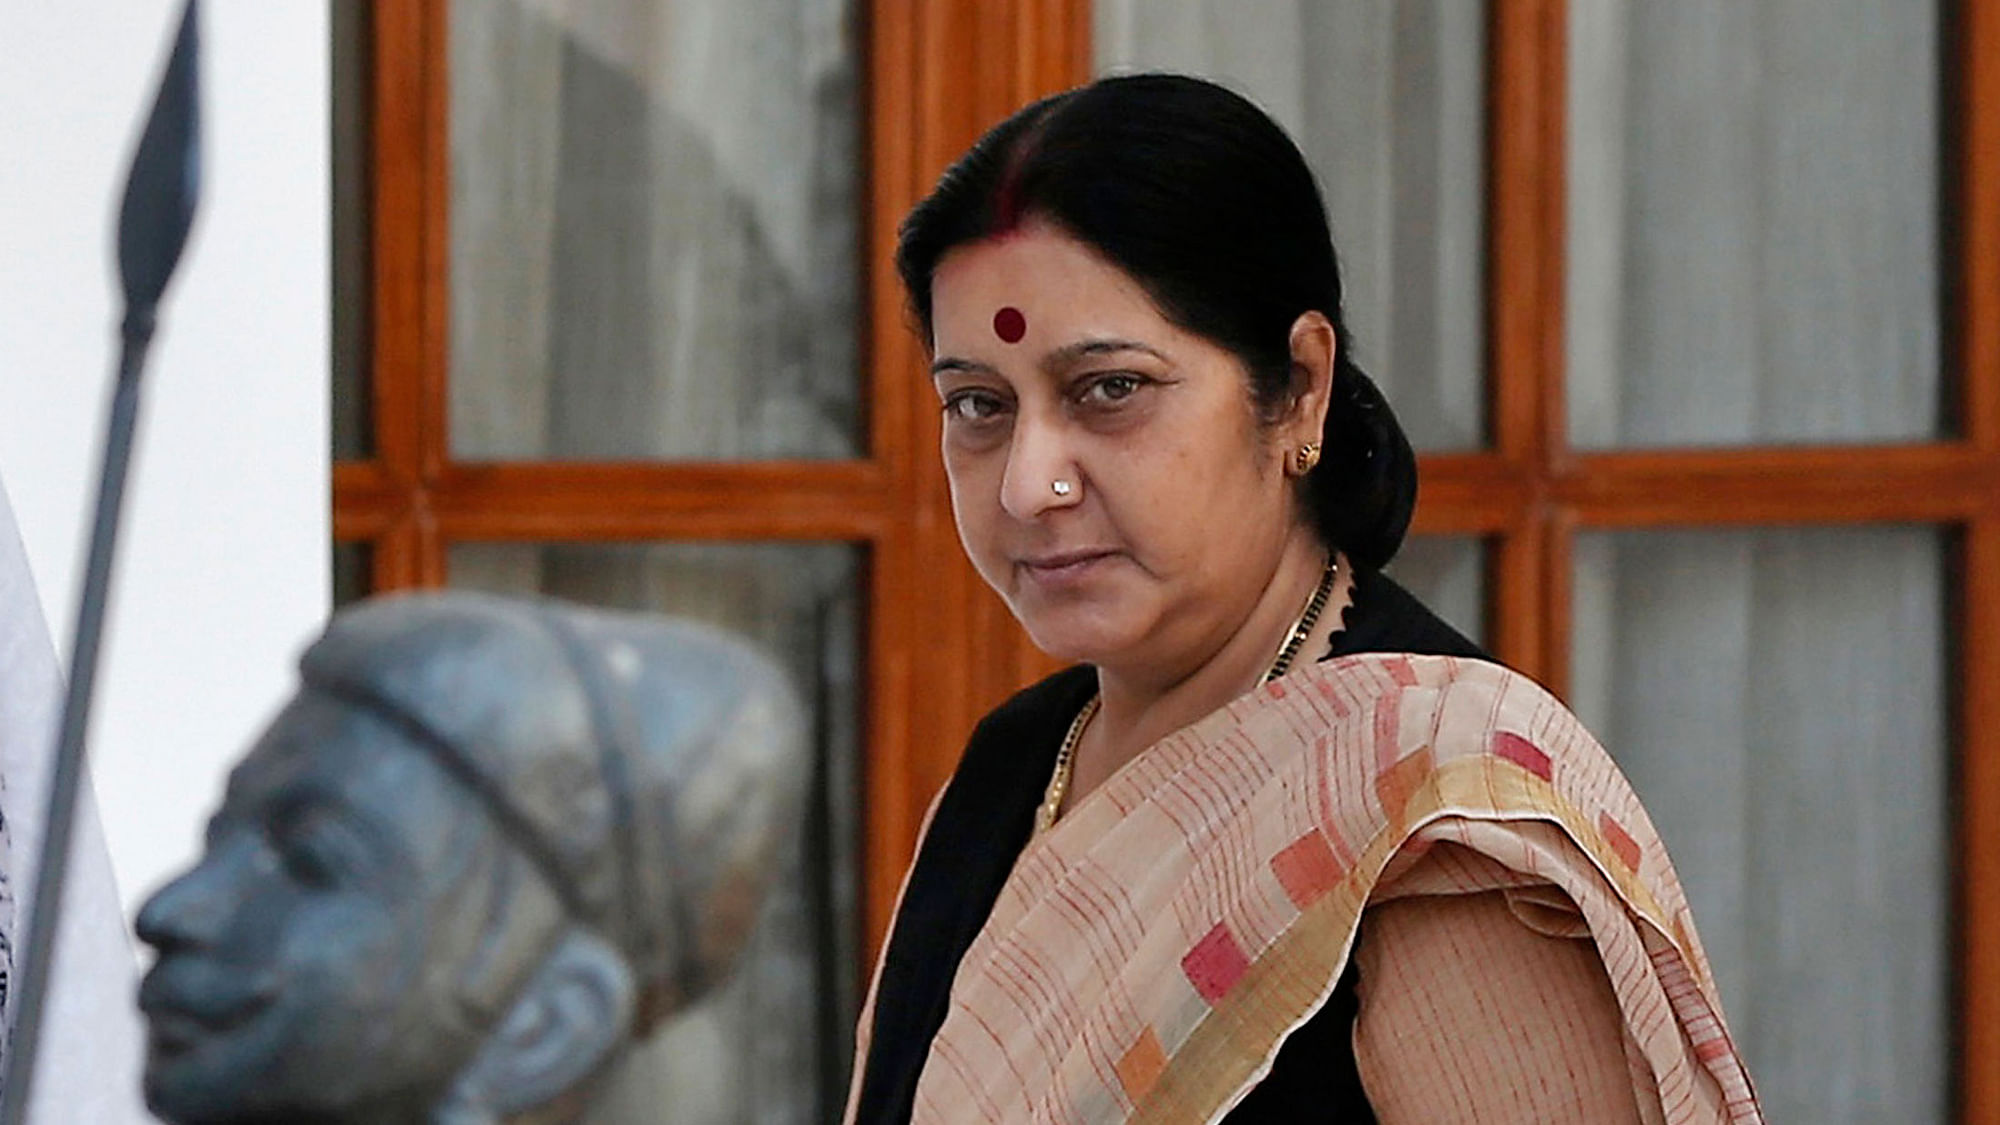 Opposition parties are demanding Sushma Swaraj’s resignation after media reports suggest she helped Lalit Modi in exchange for favours. (Photo: Reuters)